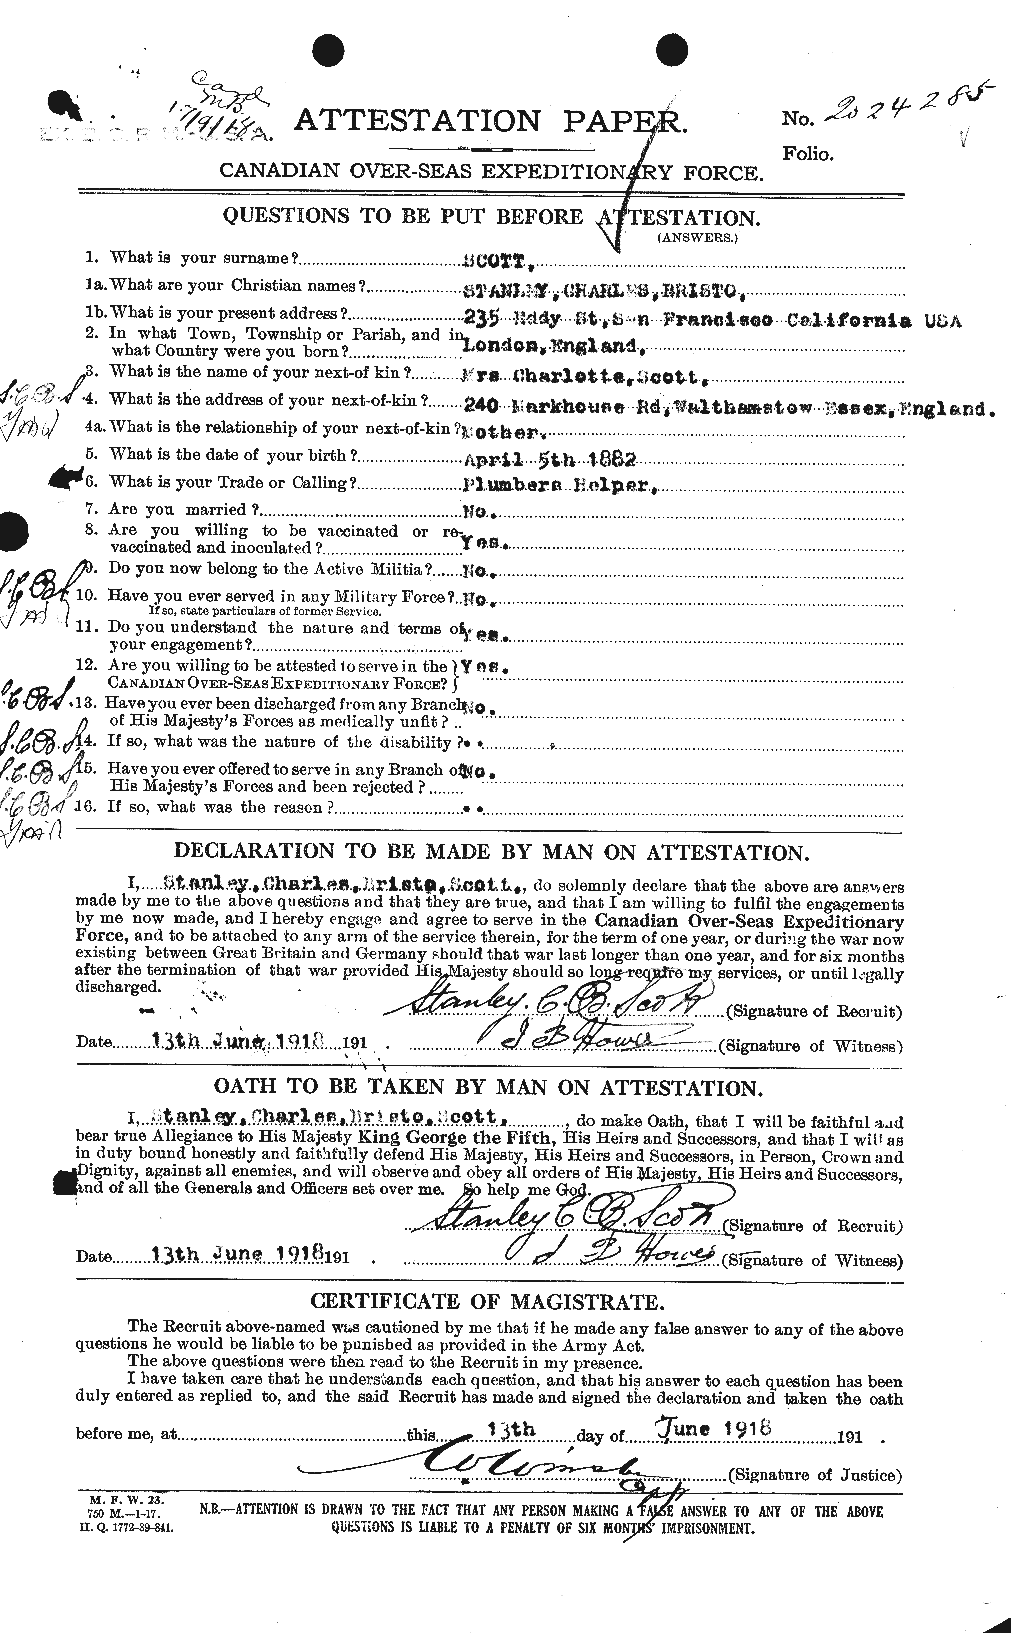 Personnel Records of the First World War - CEF 088842a